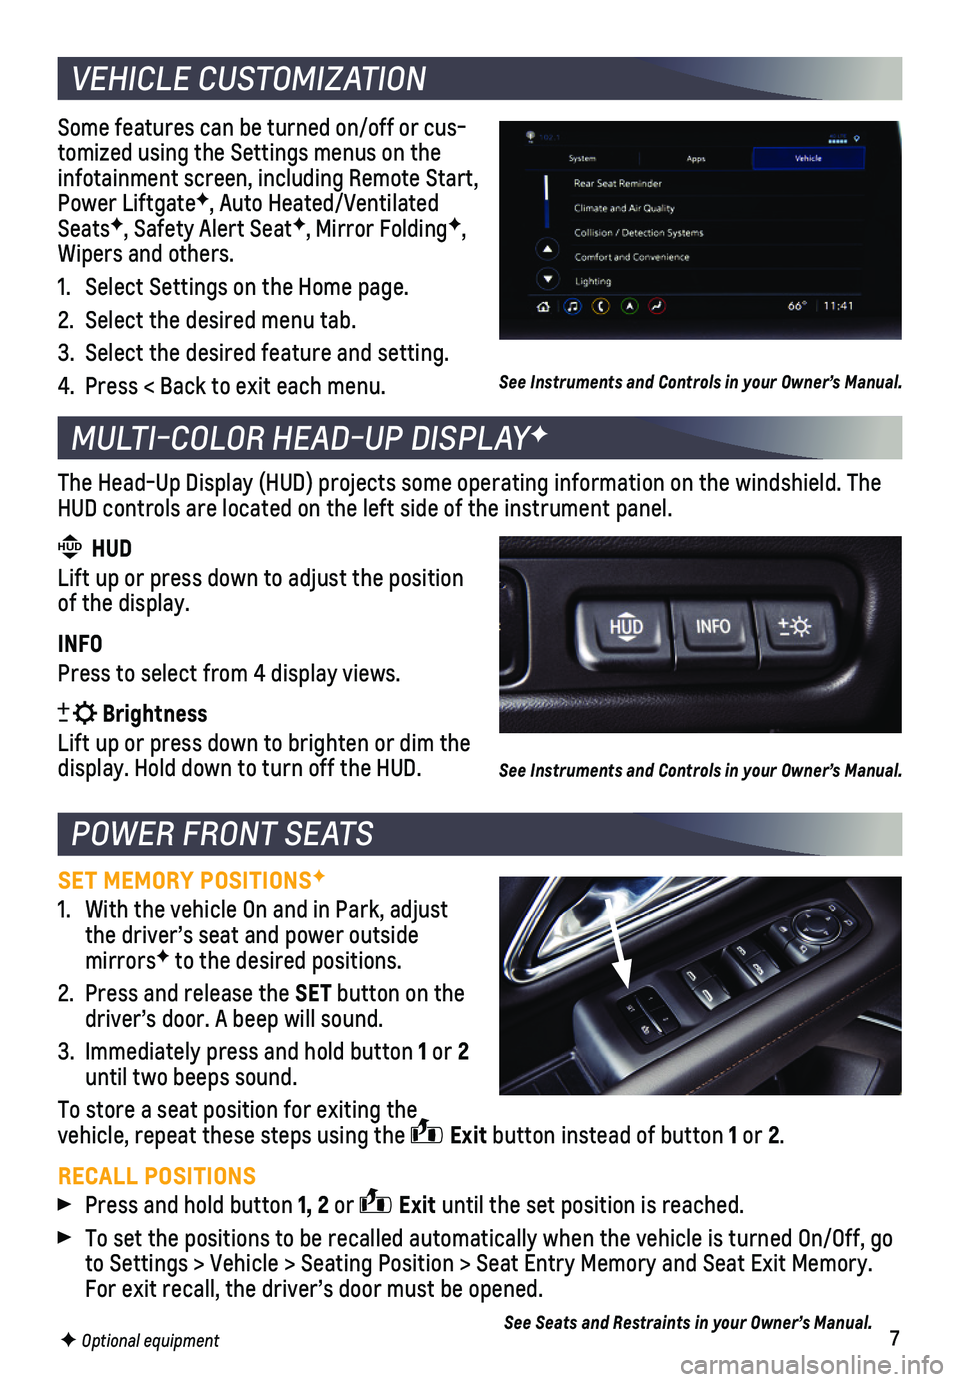 CHEVROLET TAHOE 2021  Get To Know Guide 7
Some features can be turned on/off or cus-tomized using the Settings menus on the infotainment screen, including Remote Start, Power LiftgateF, Auto Heated/Ventilated SeatsF, Safety Alert SeatF, Mir